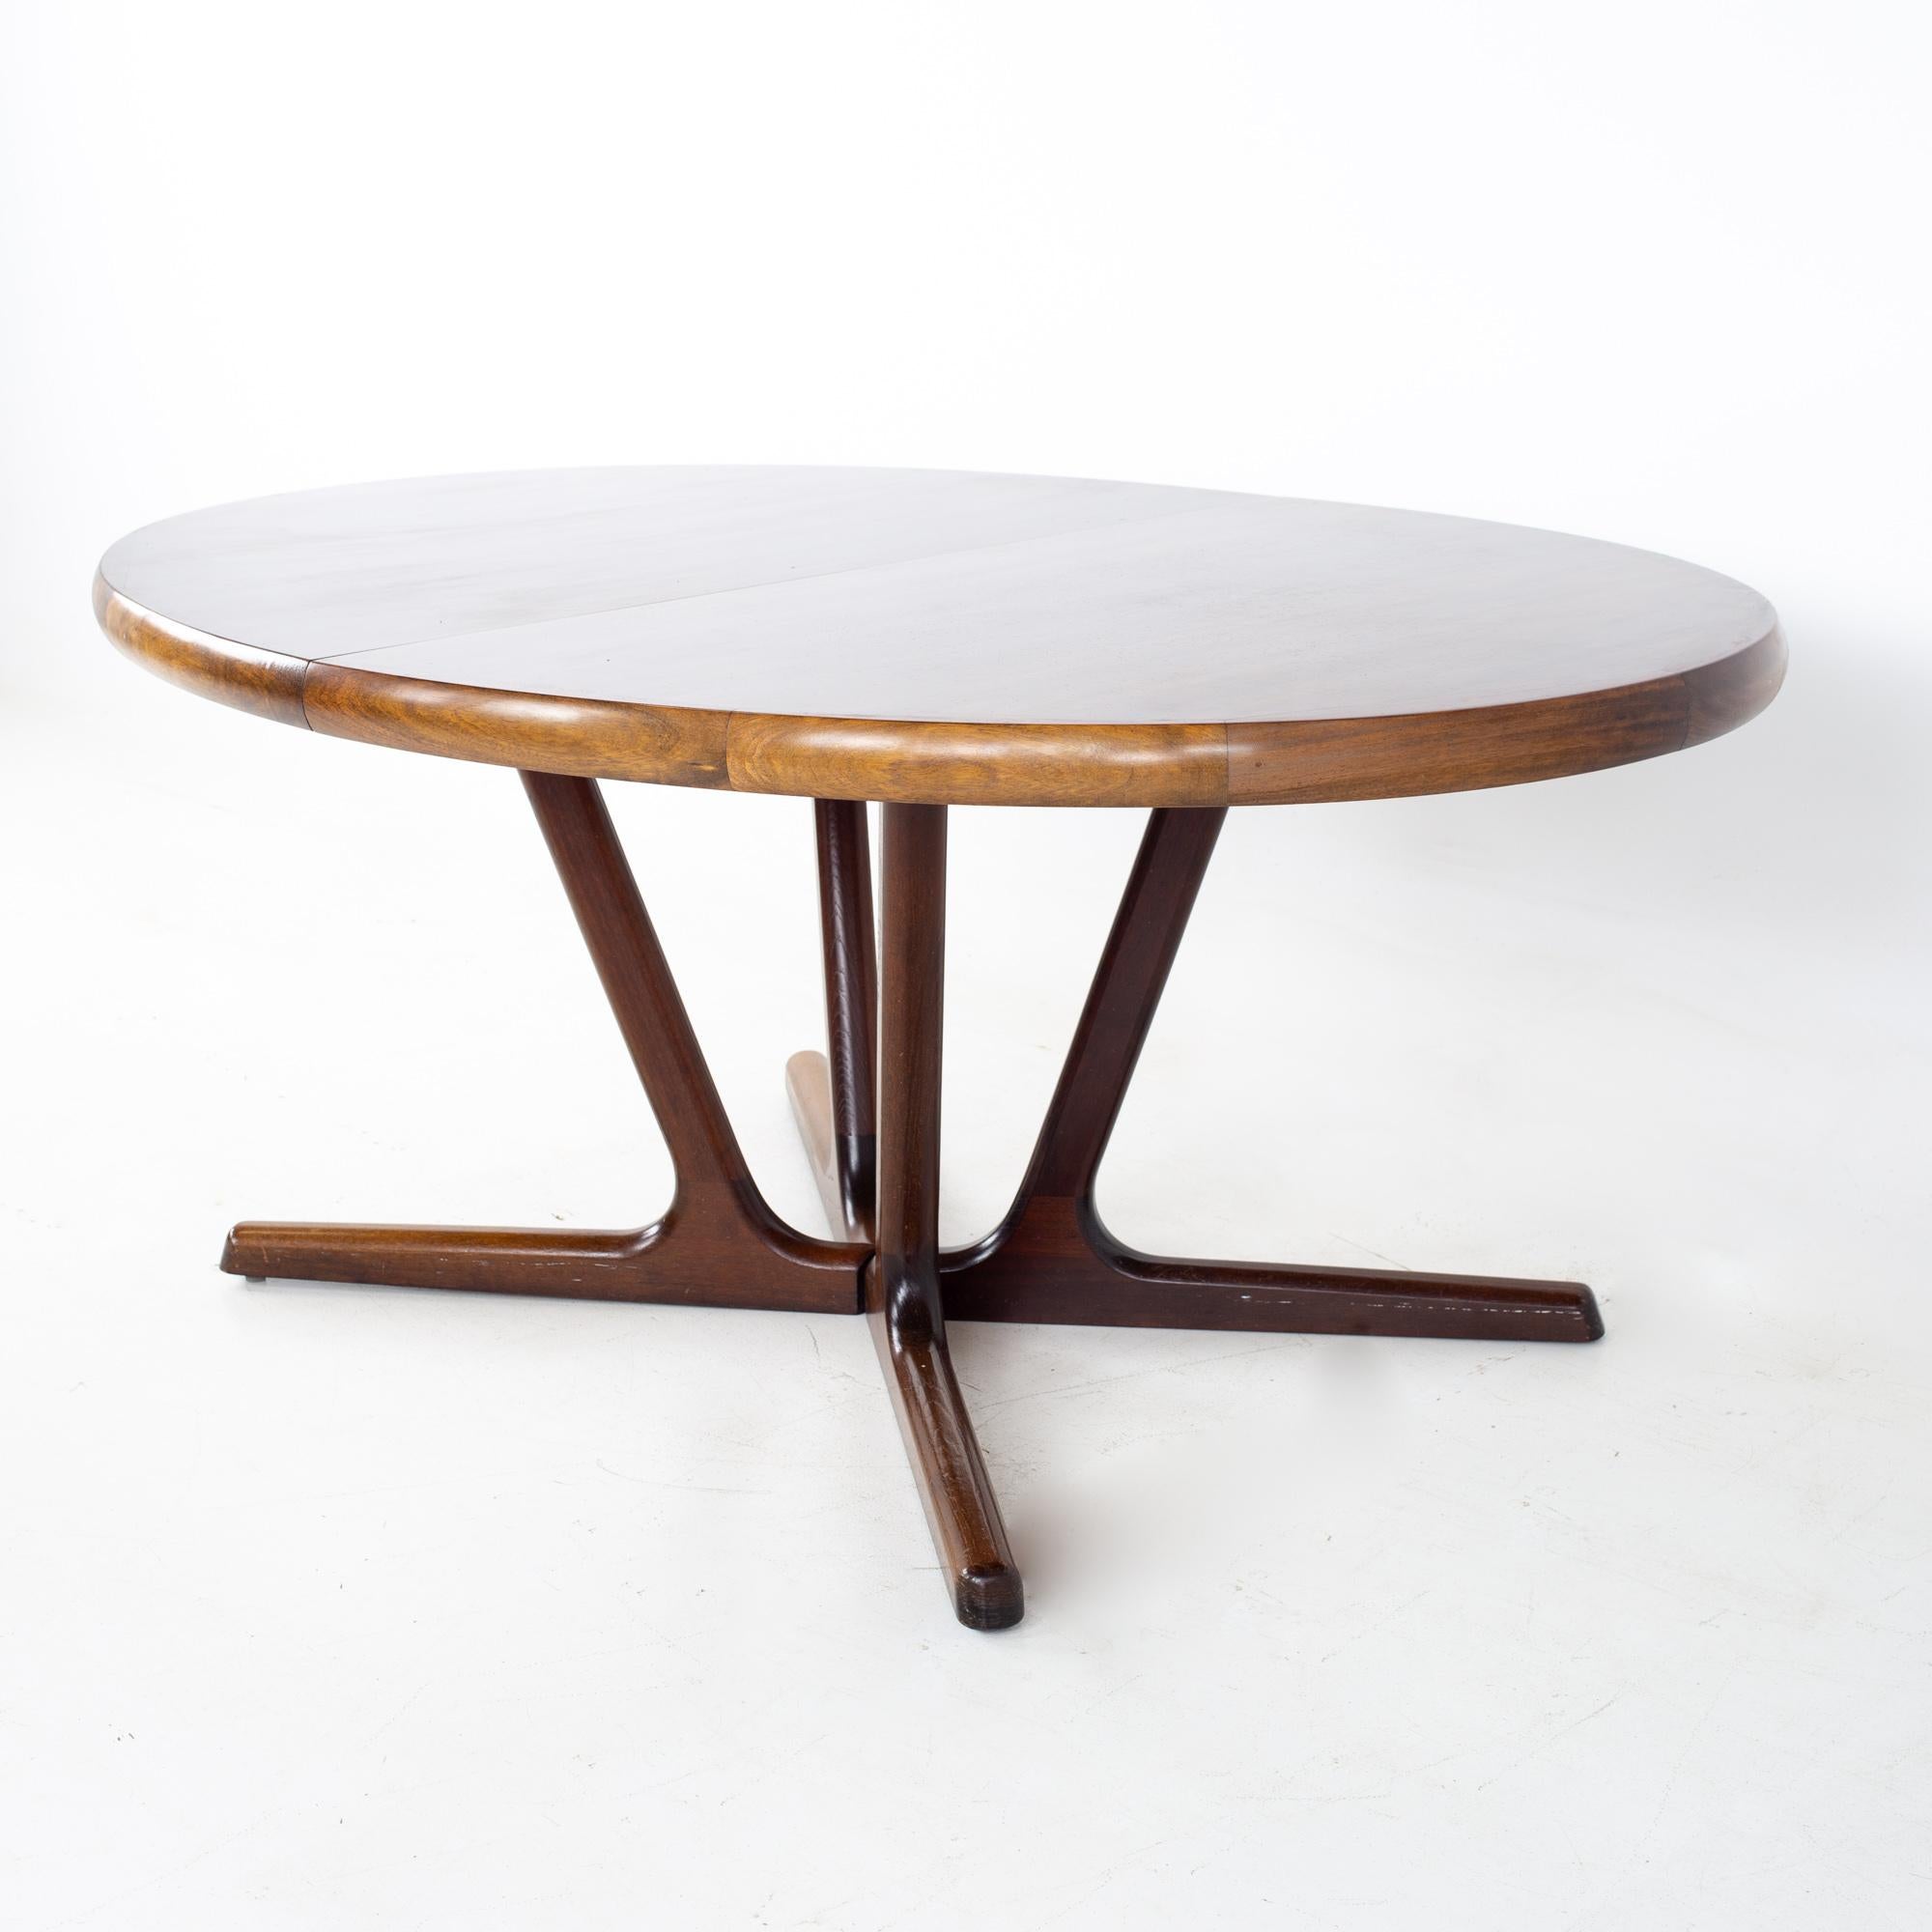 Interform Collection Mid Century Danish rosewood 12 person expanding oval pedestal dining table
Table measures: 68 wide x 47 deep x 27.5 inches high; each leaf is 19.75 inches wide, making a maximum table width of 127.25 when all three leaves are